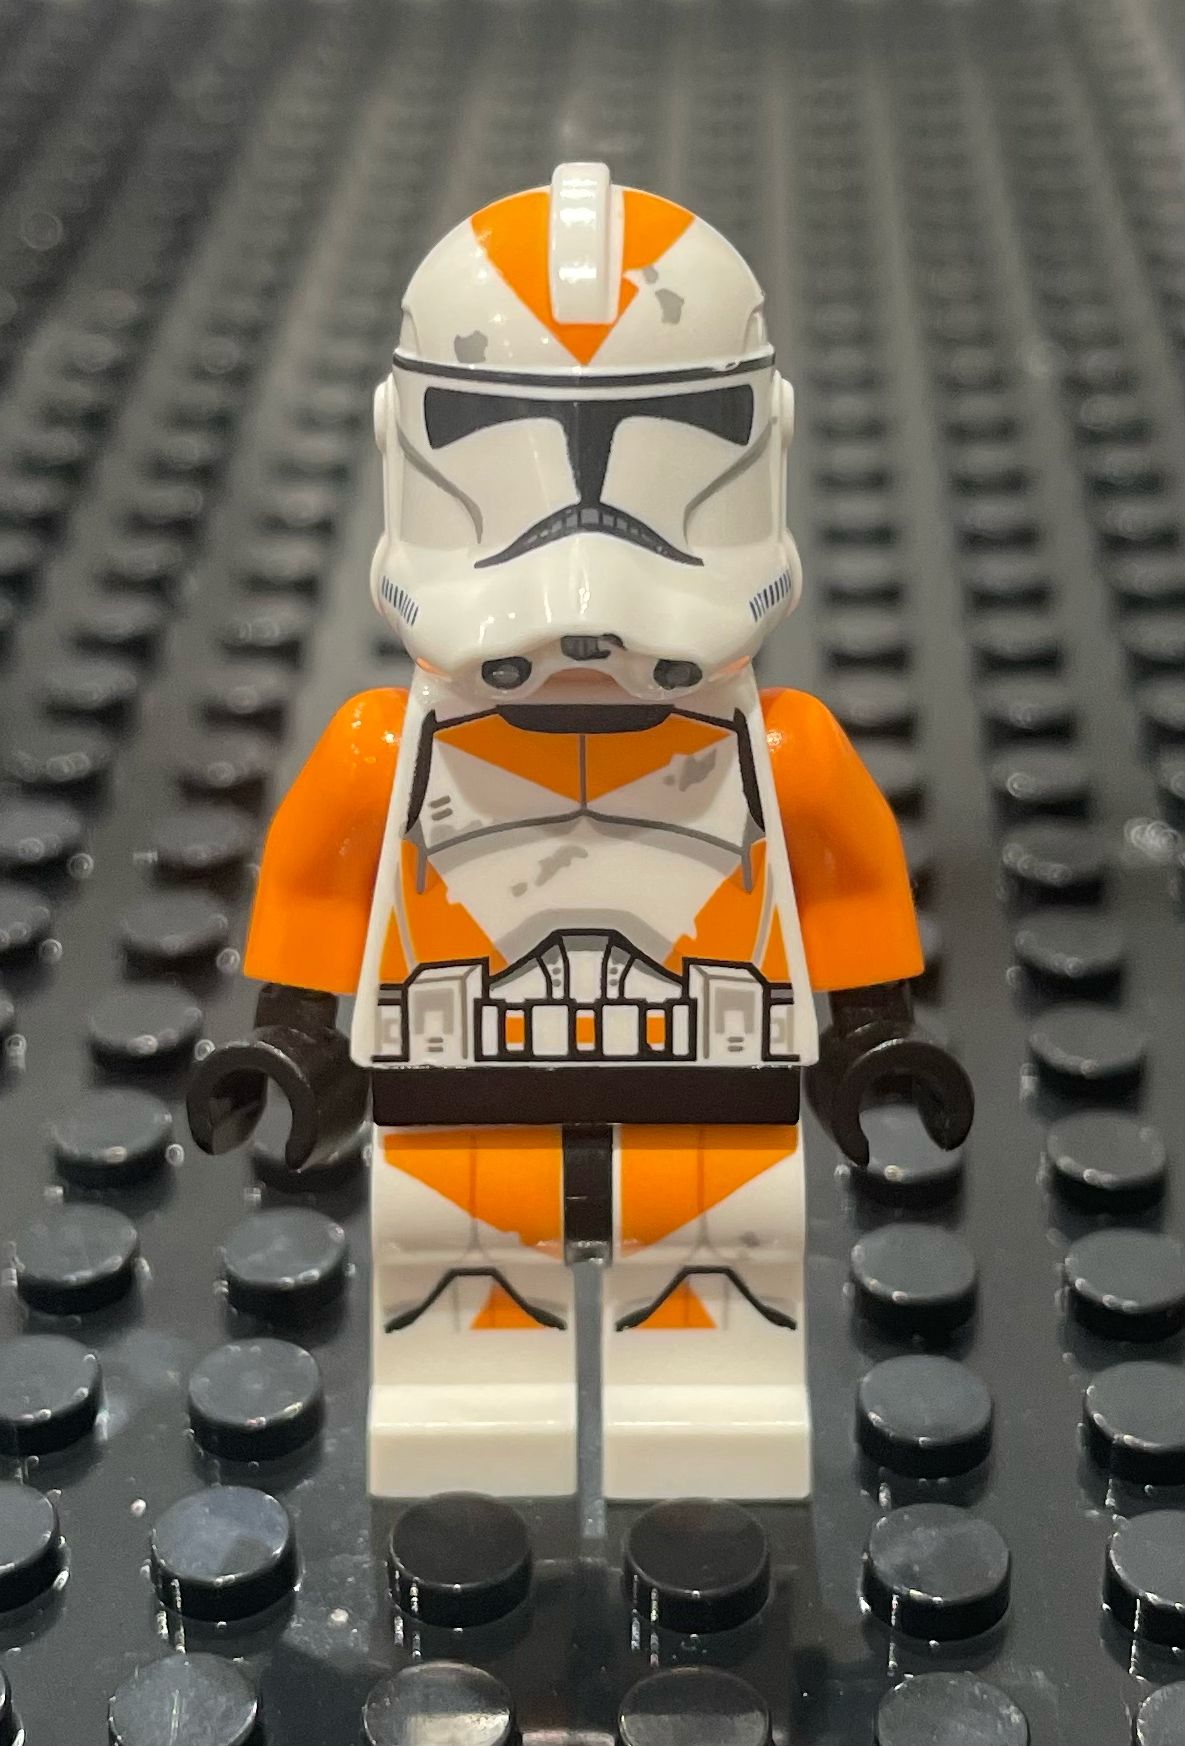 SW0522: Clone Trooper, 212th Attack Battalion (Phase 2) - Orange Arms, Dirt Stains, Scowl